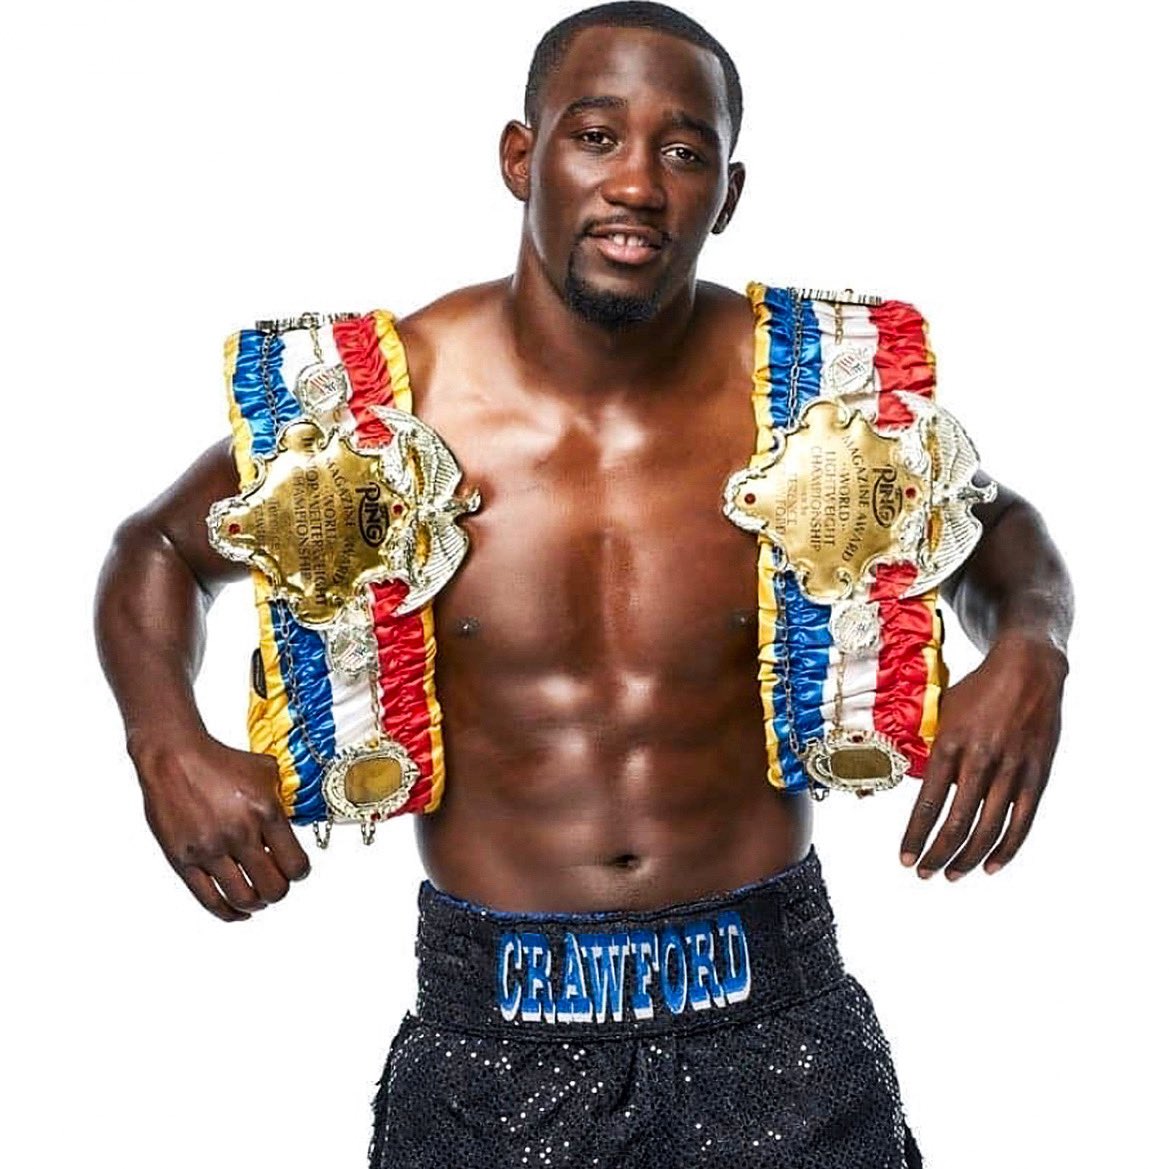 Crawford's lawsuit vs. Top Rank heads back to state court